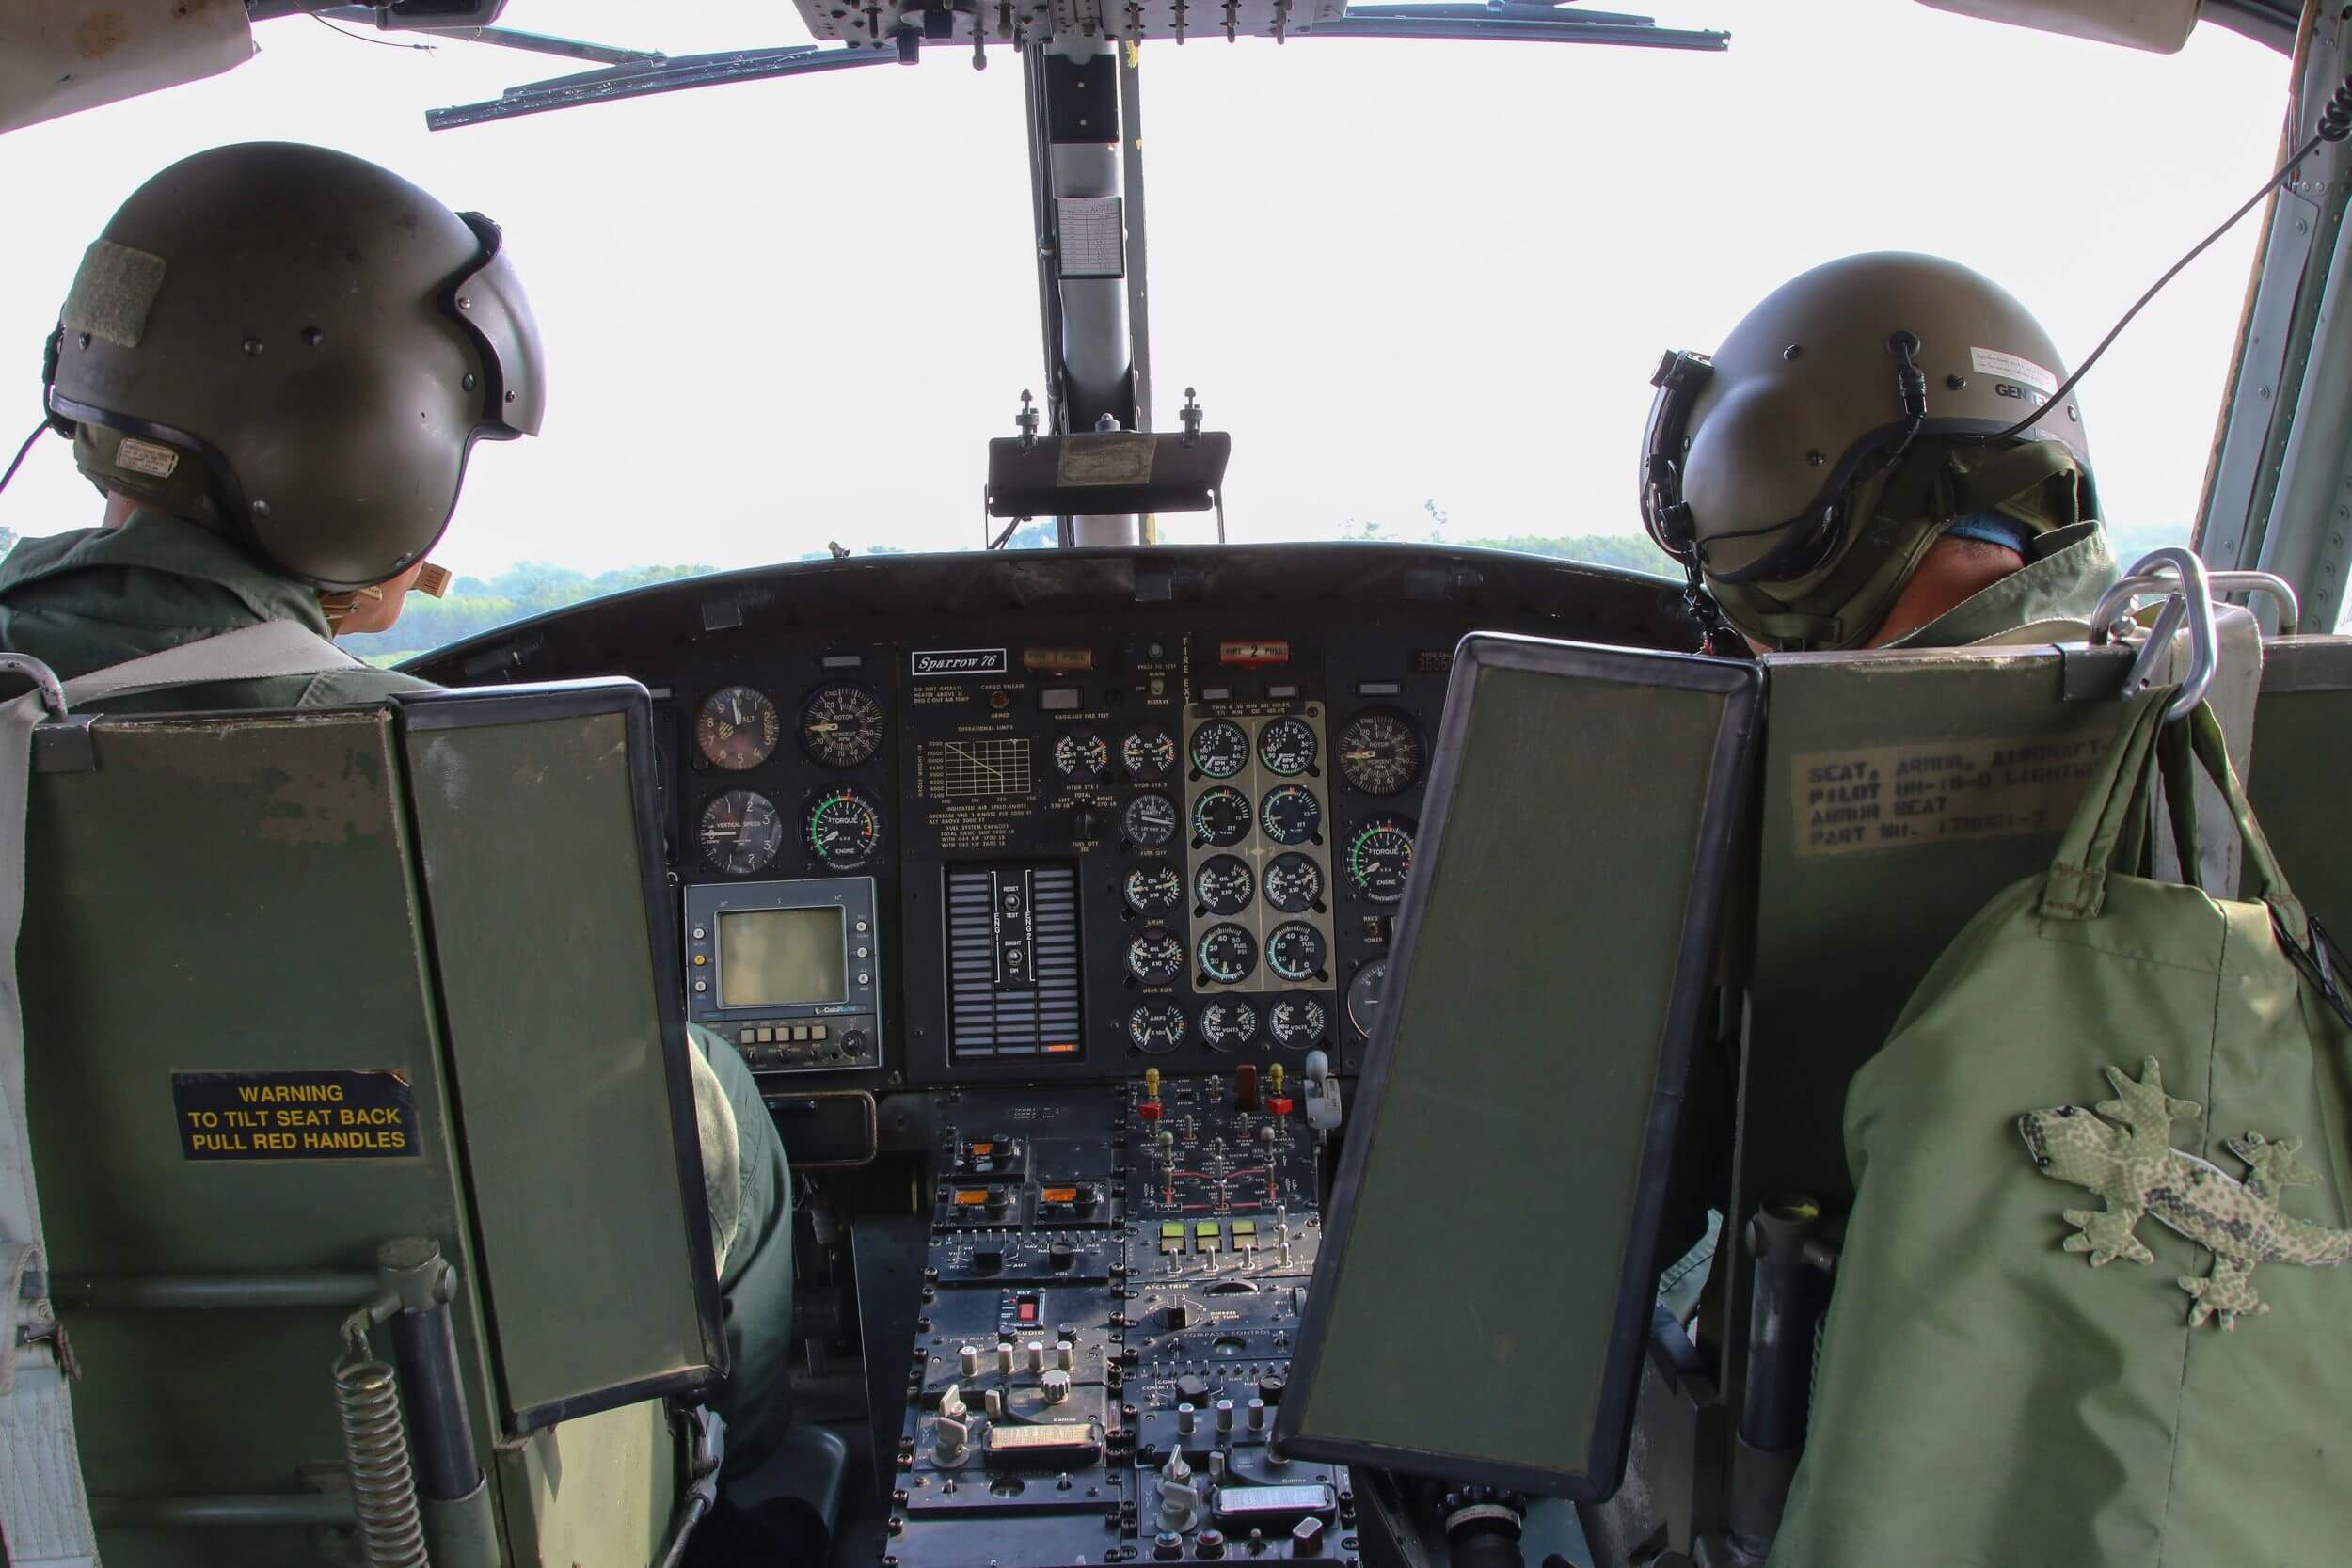 Two airforce pilots sitting in helicopter cockpit.